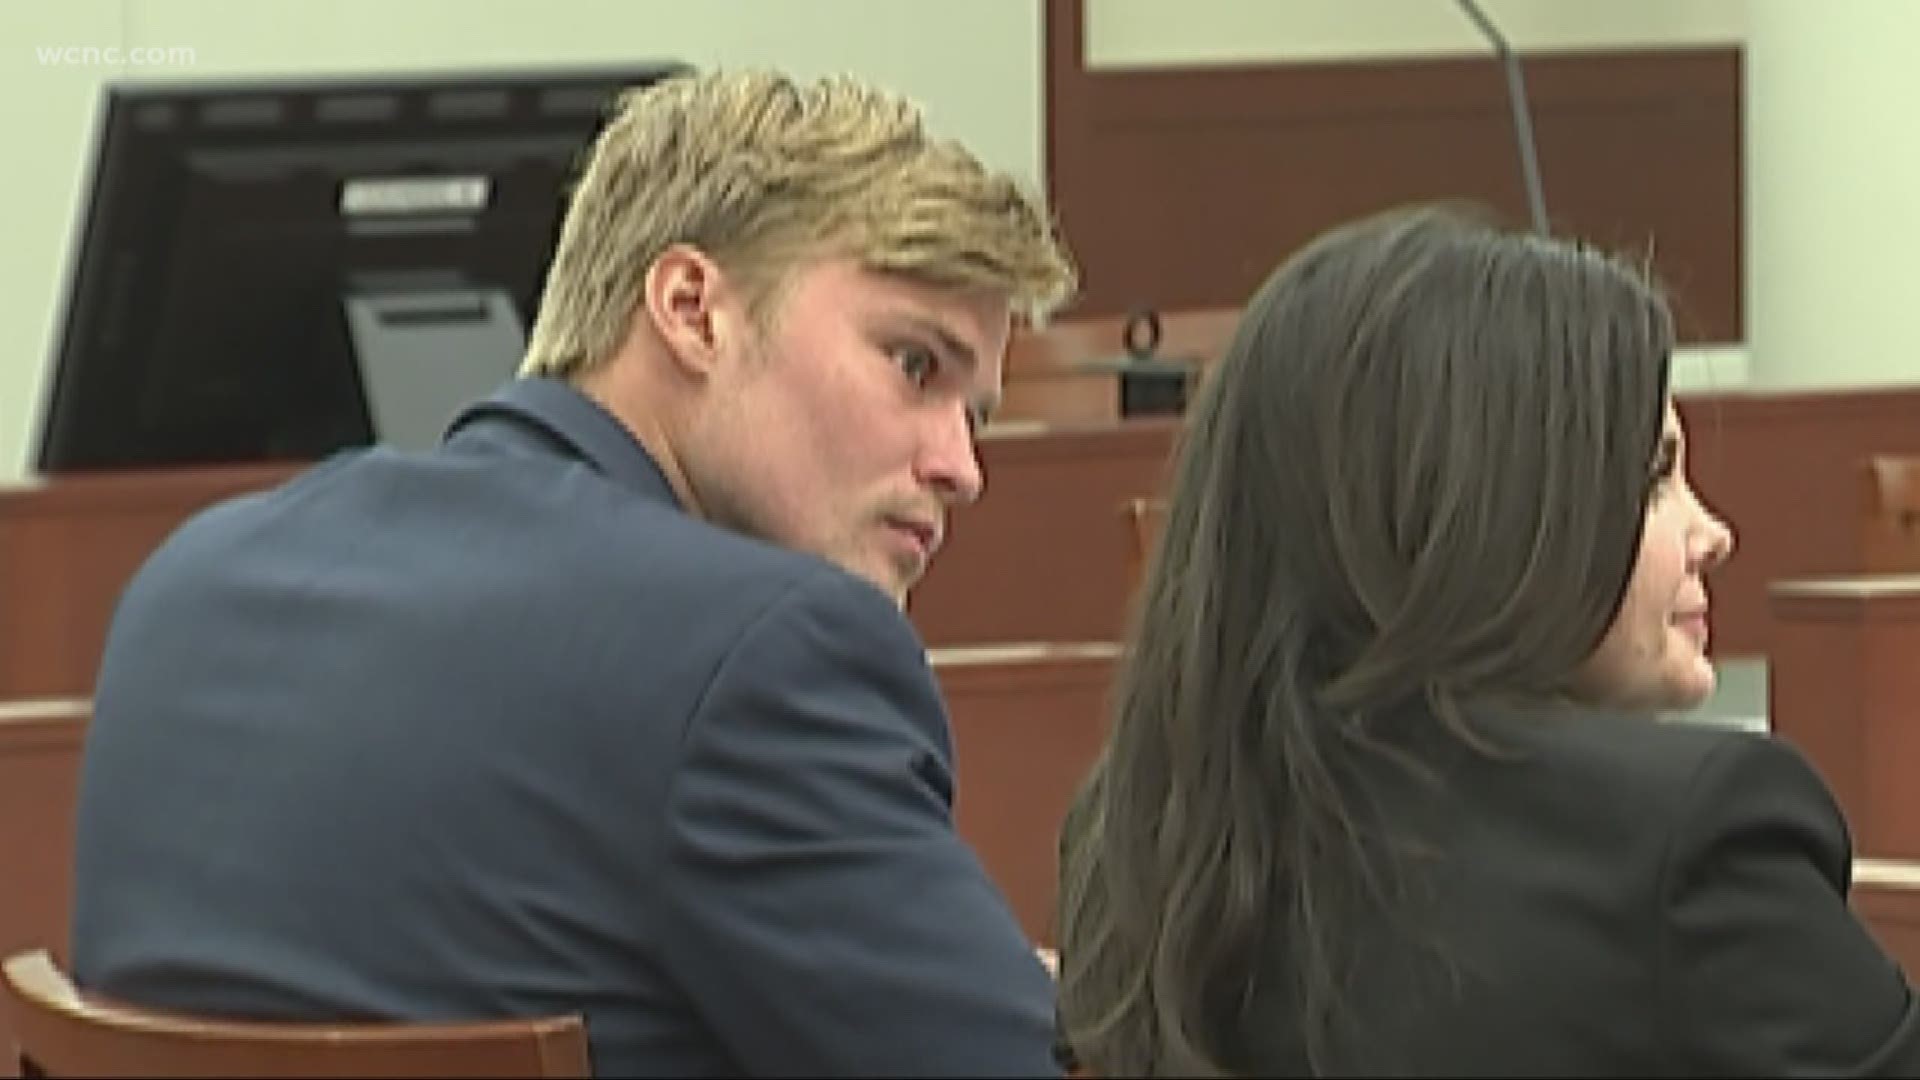 The state and defense have rested their cases in the rape trial against former UNCC quarterback Kevin Olsen.